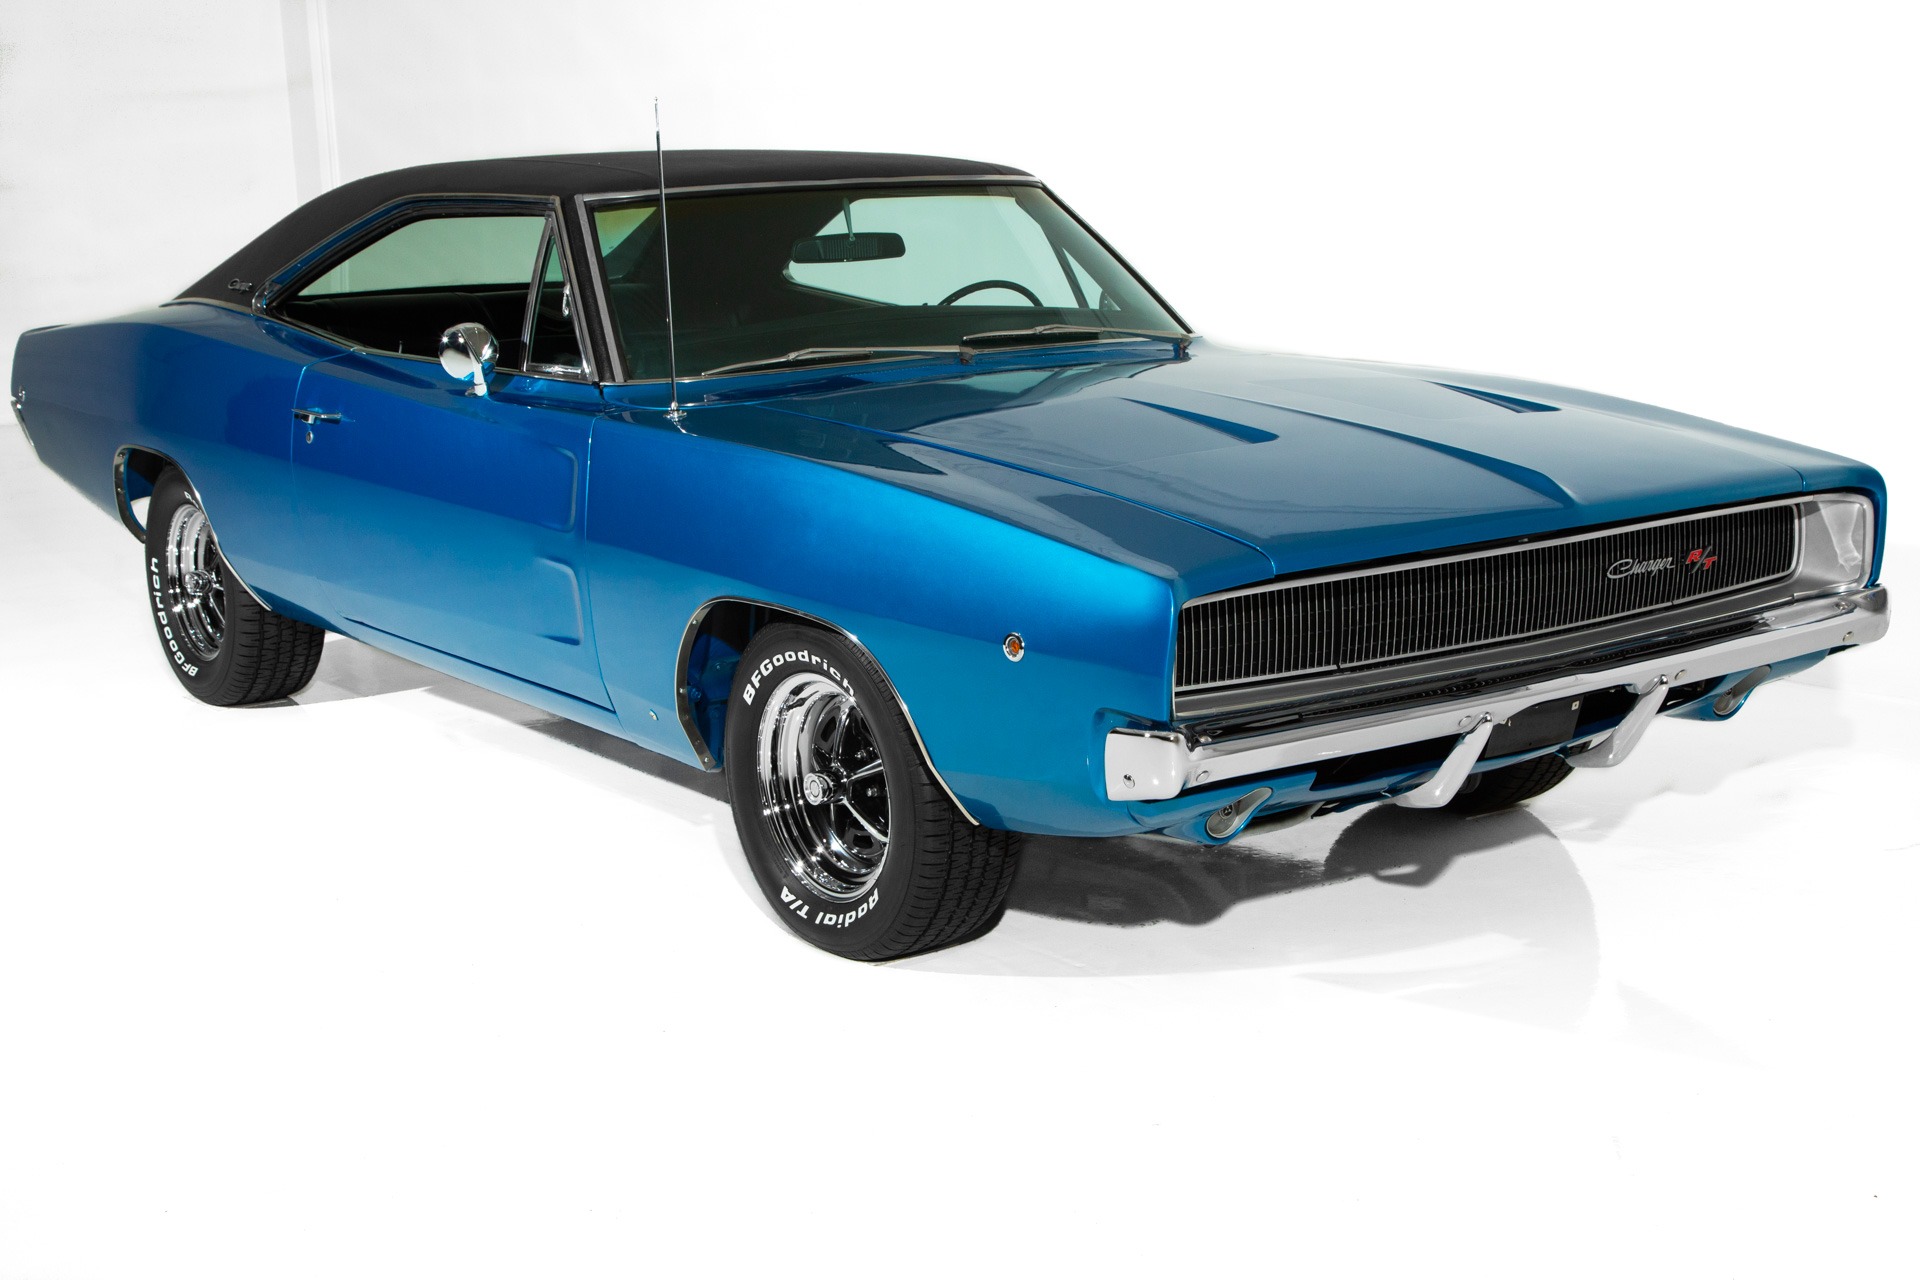 For Sale Used 1968 Dodge Charger B5 Blue, Black Interior 440, 4-Speed, Extensive  Frame-Off Restoration. | American Dream Machines Des Moines IA 50309